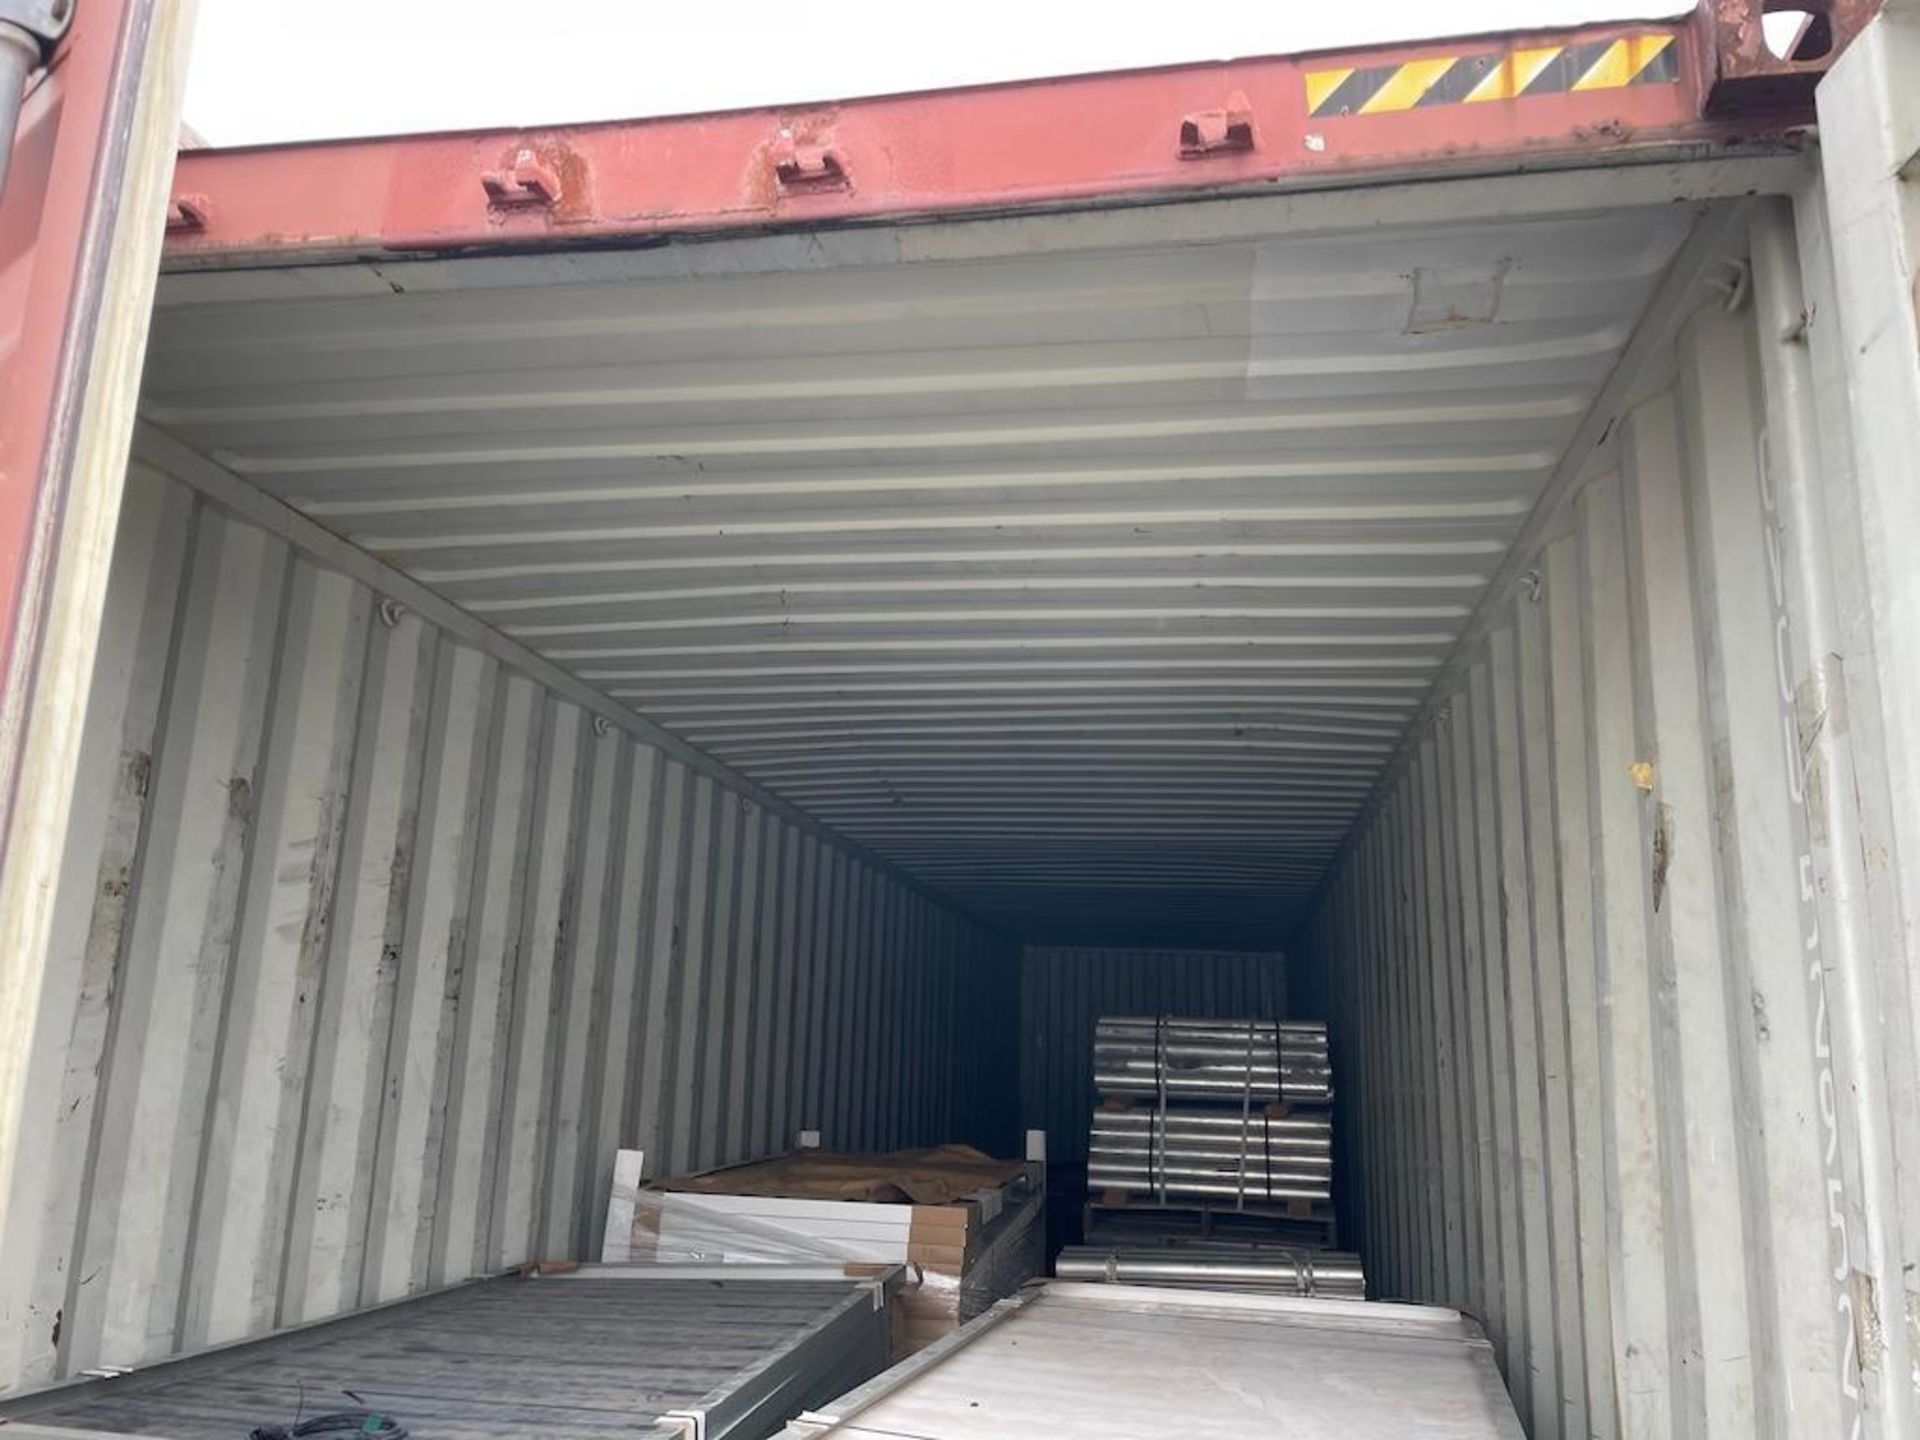 40 FT SEA CONTAINER, EXCLUDING CONTENTS, DELAYED PICK UP UNTIL MAY 13 [8] [TROIS RIVIERES] *PLEASE N - Image 3 of 5